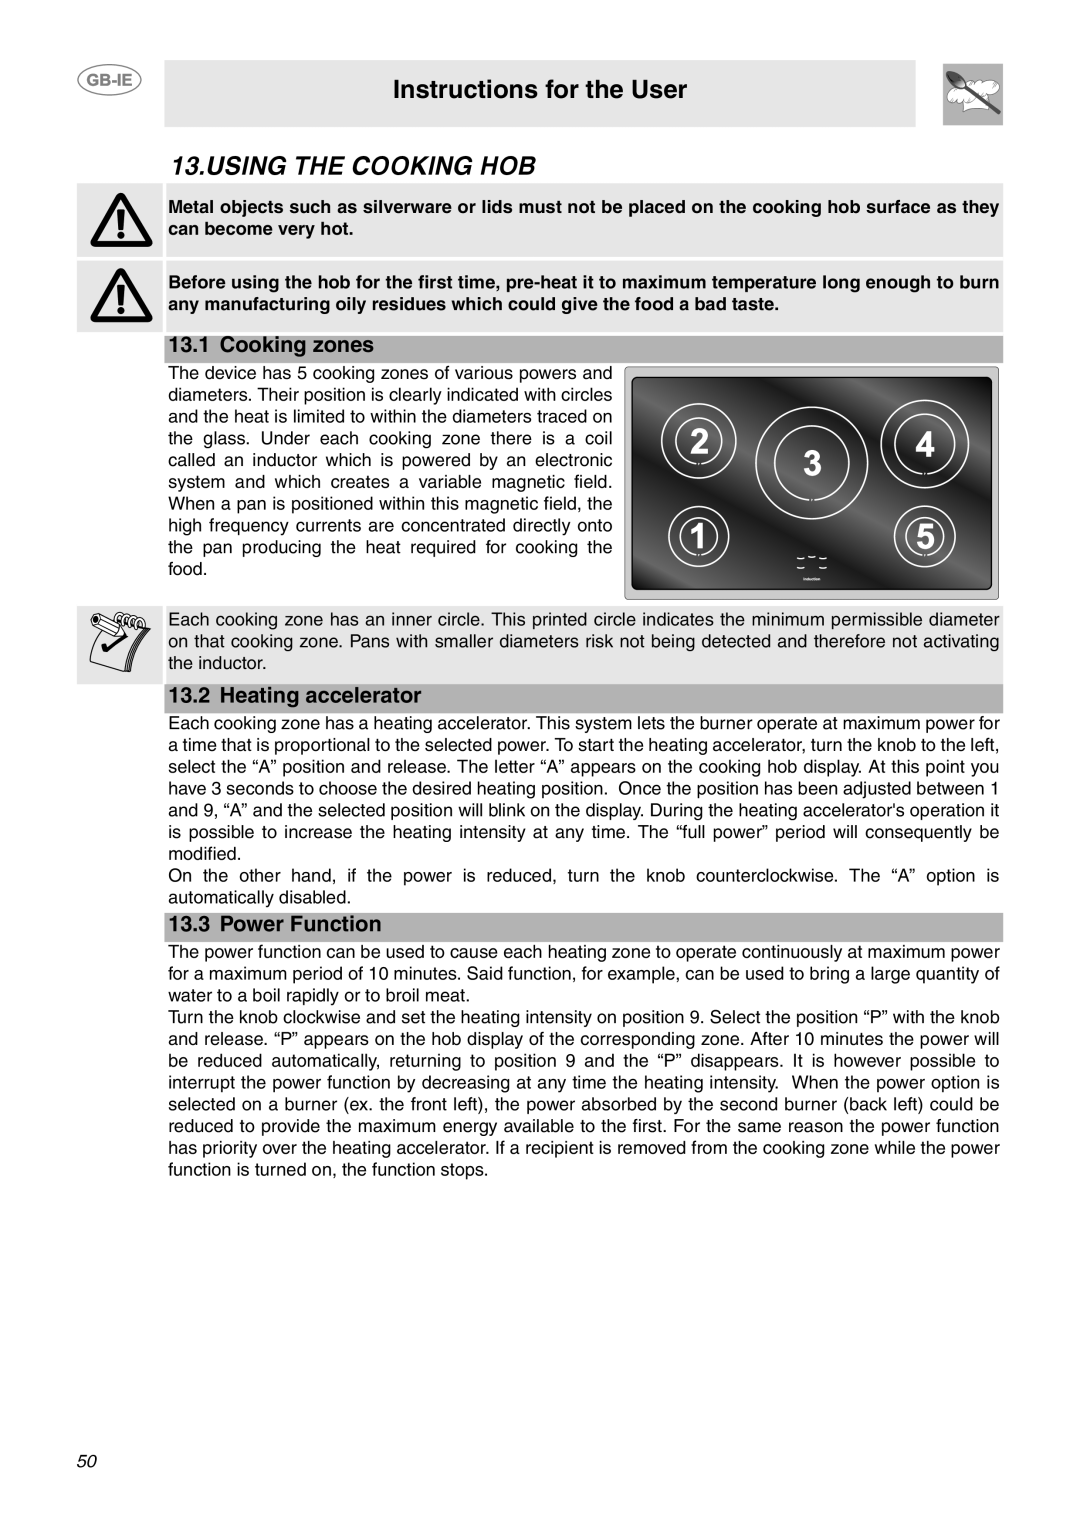 Smeg CE92IMX manual Using The Cooking Hob, Cooking zones, Heating accelerator, Power Function, Instructions for the User 